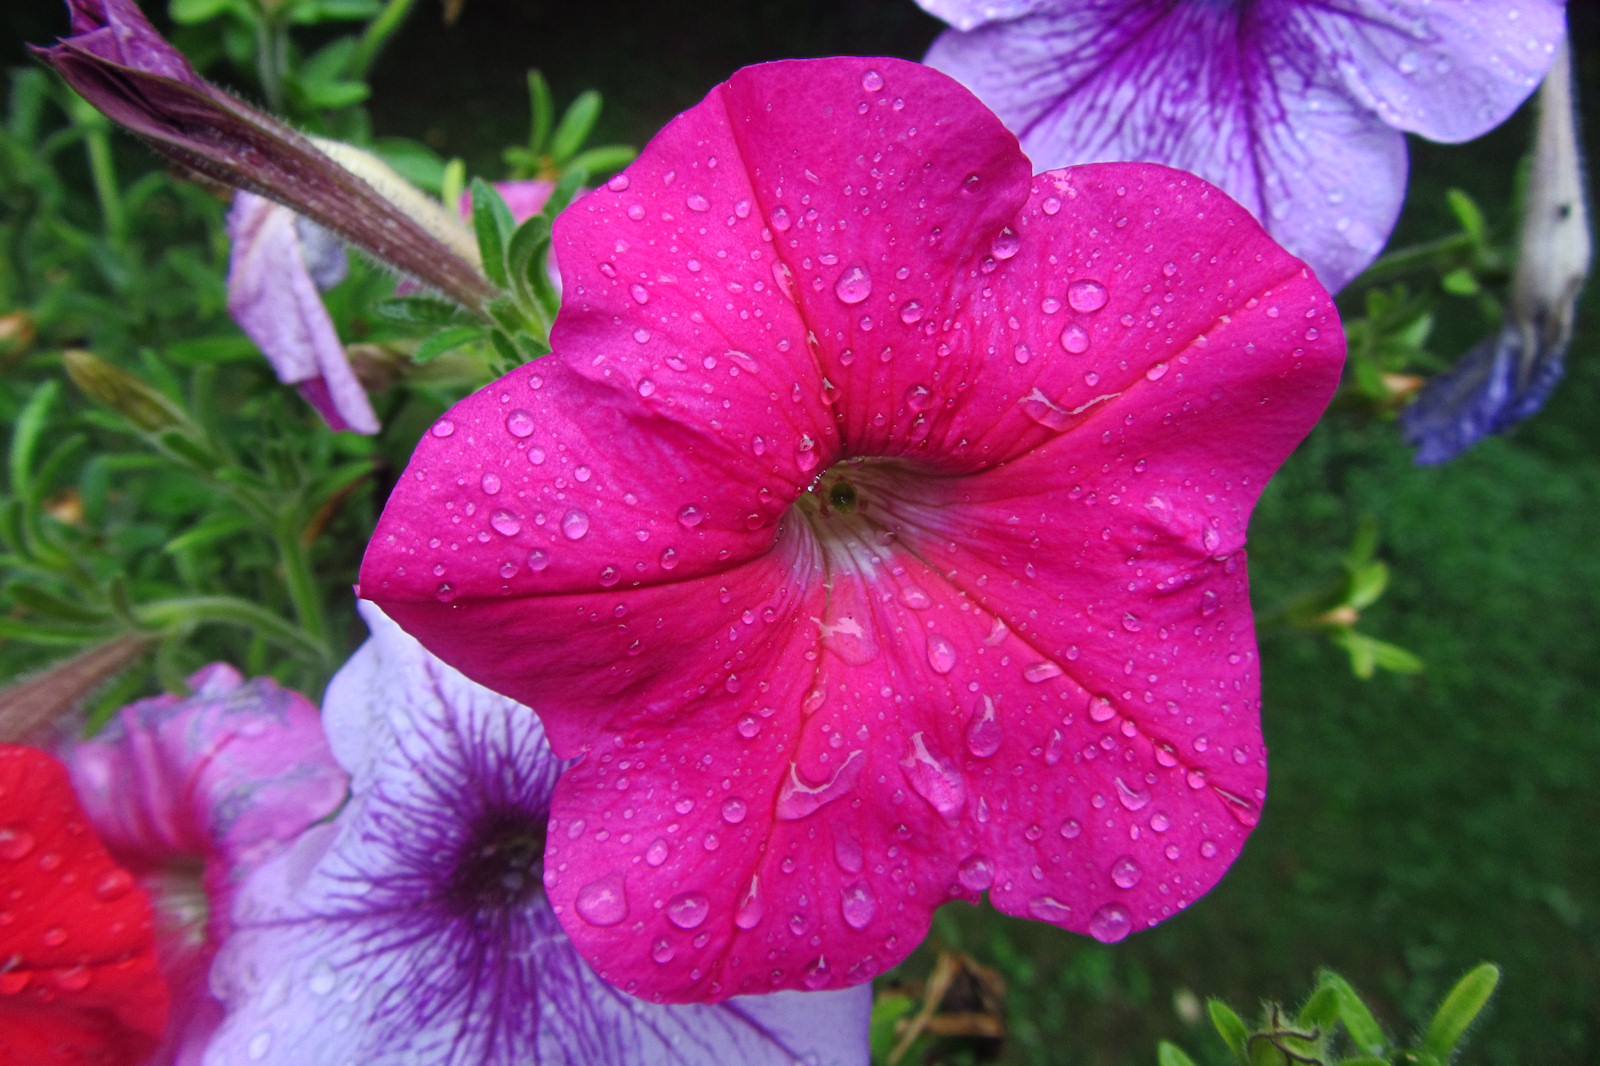 Water Drops on Red Petunia<BR>August 6, 2011